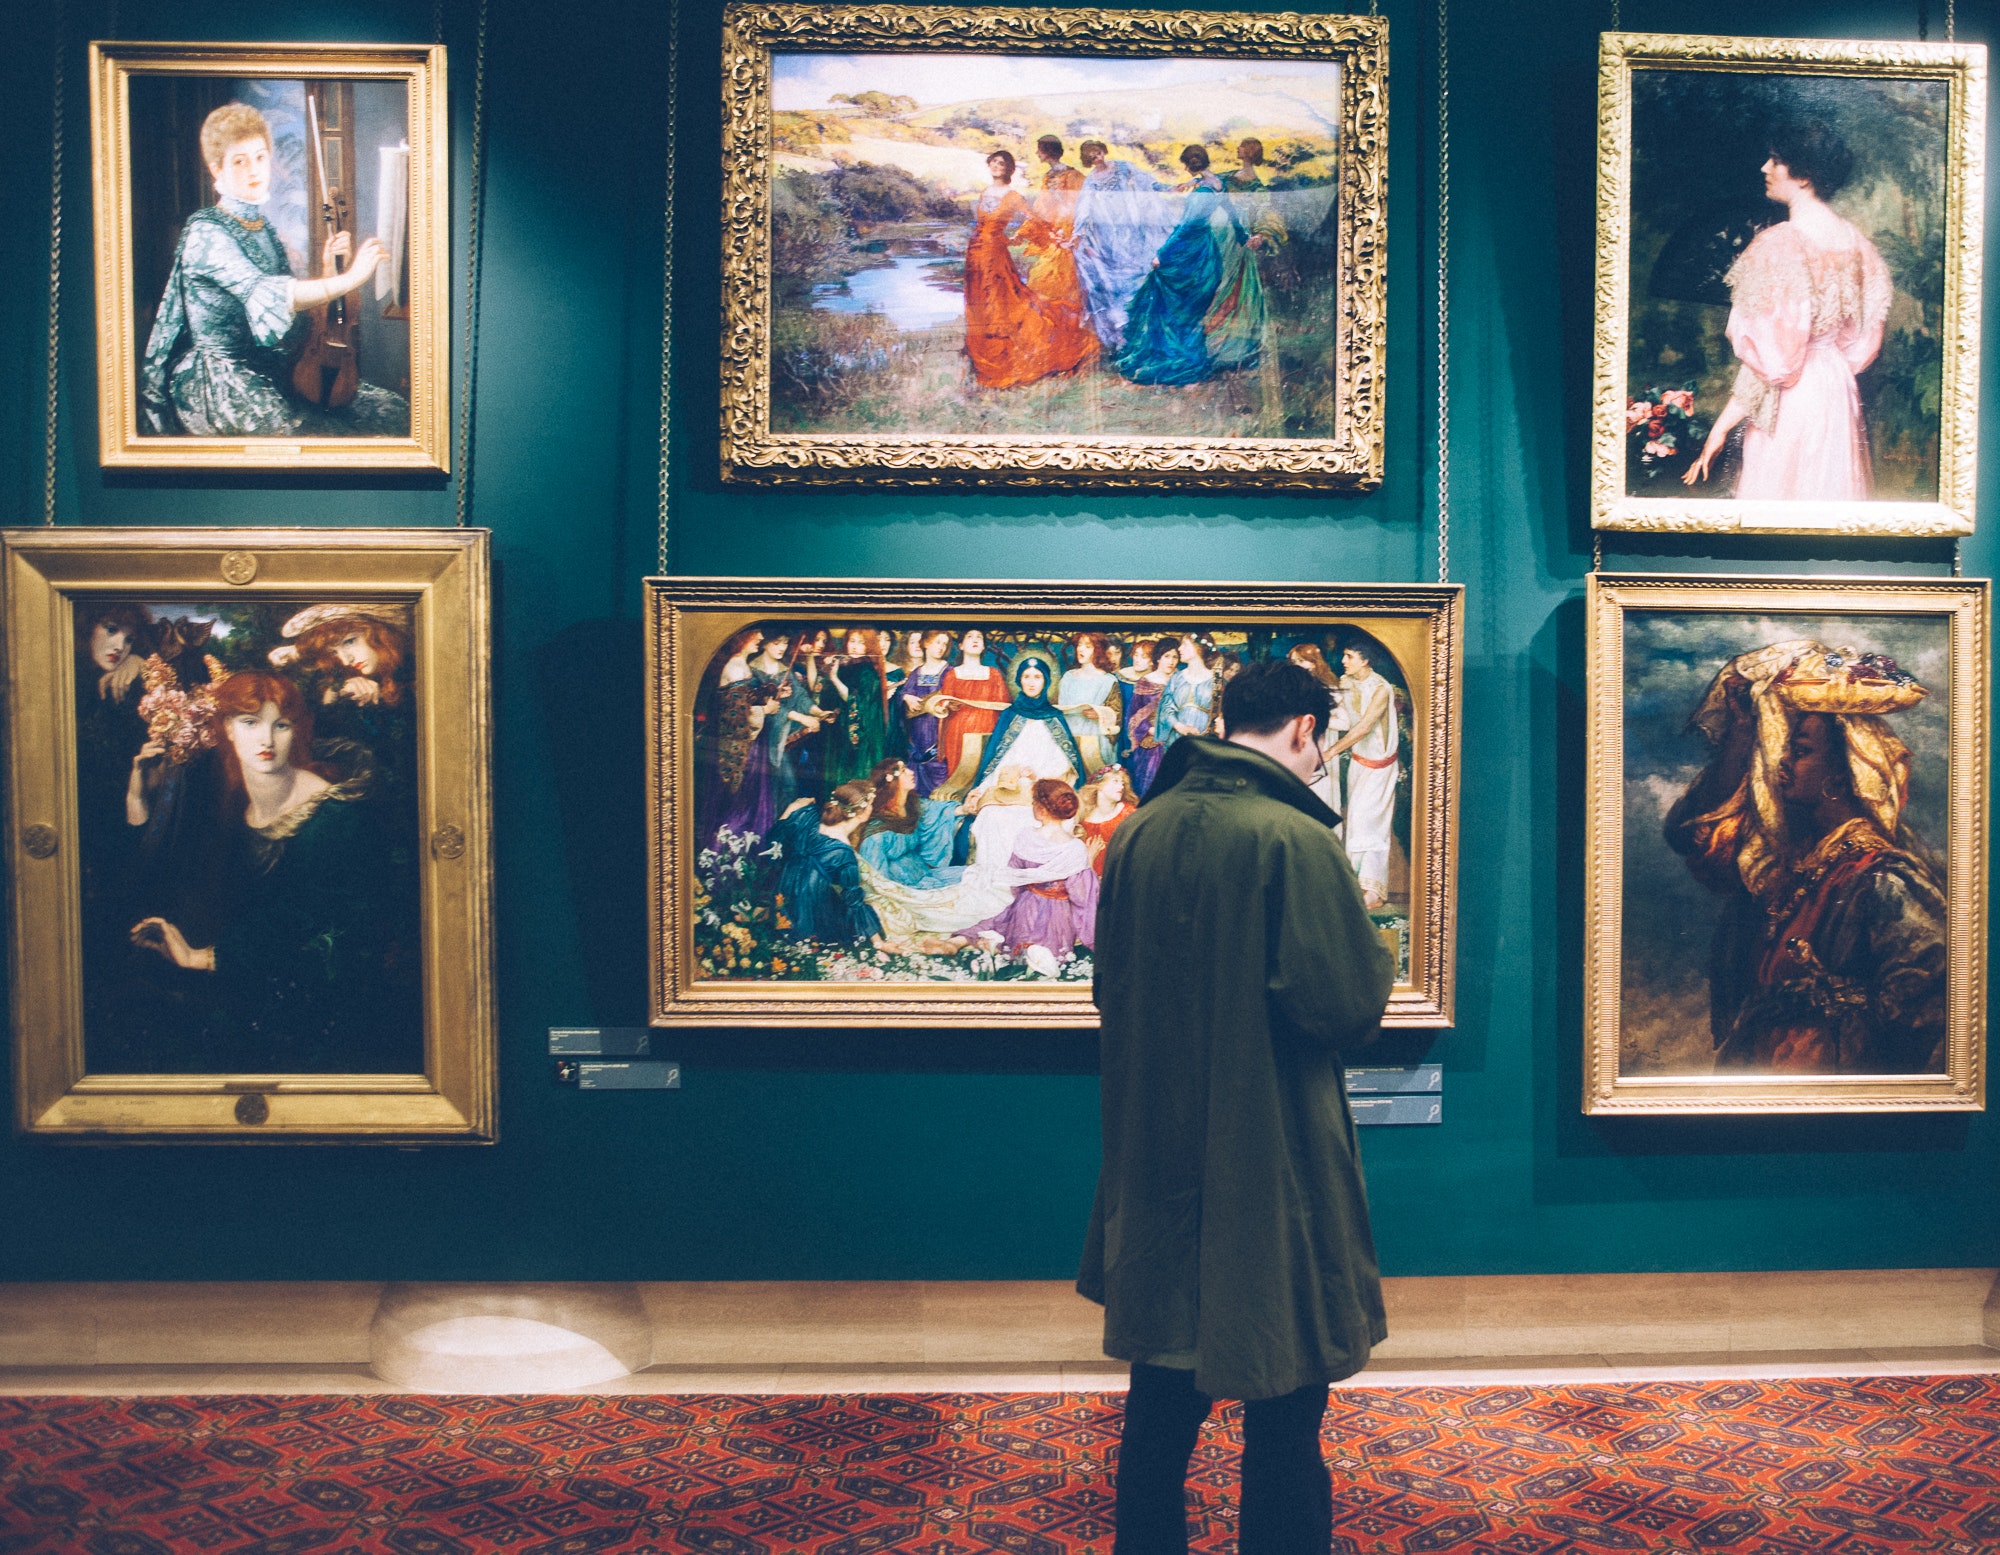 Will breakthrough security technology solve the next big art heist or make it worse?